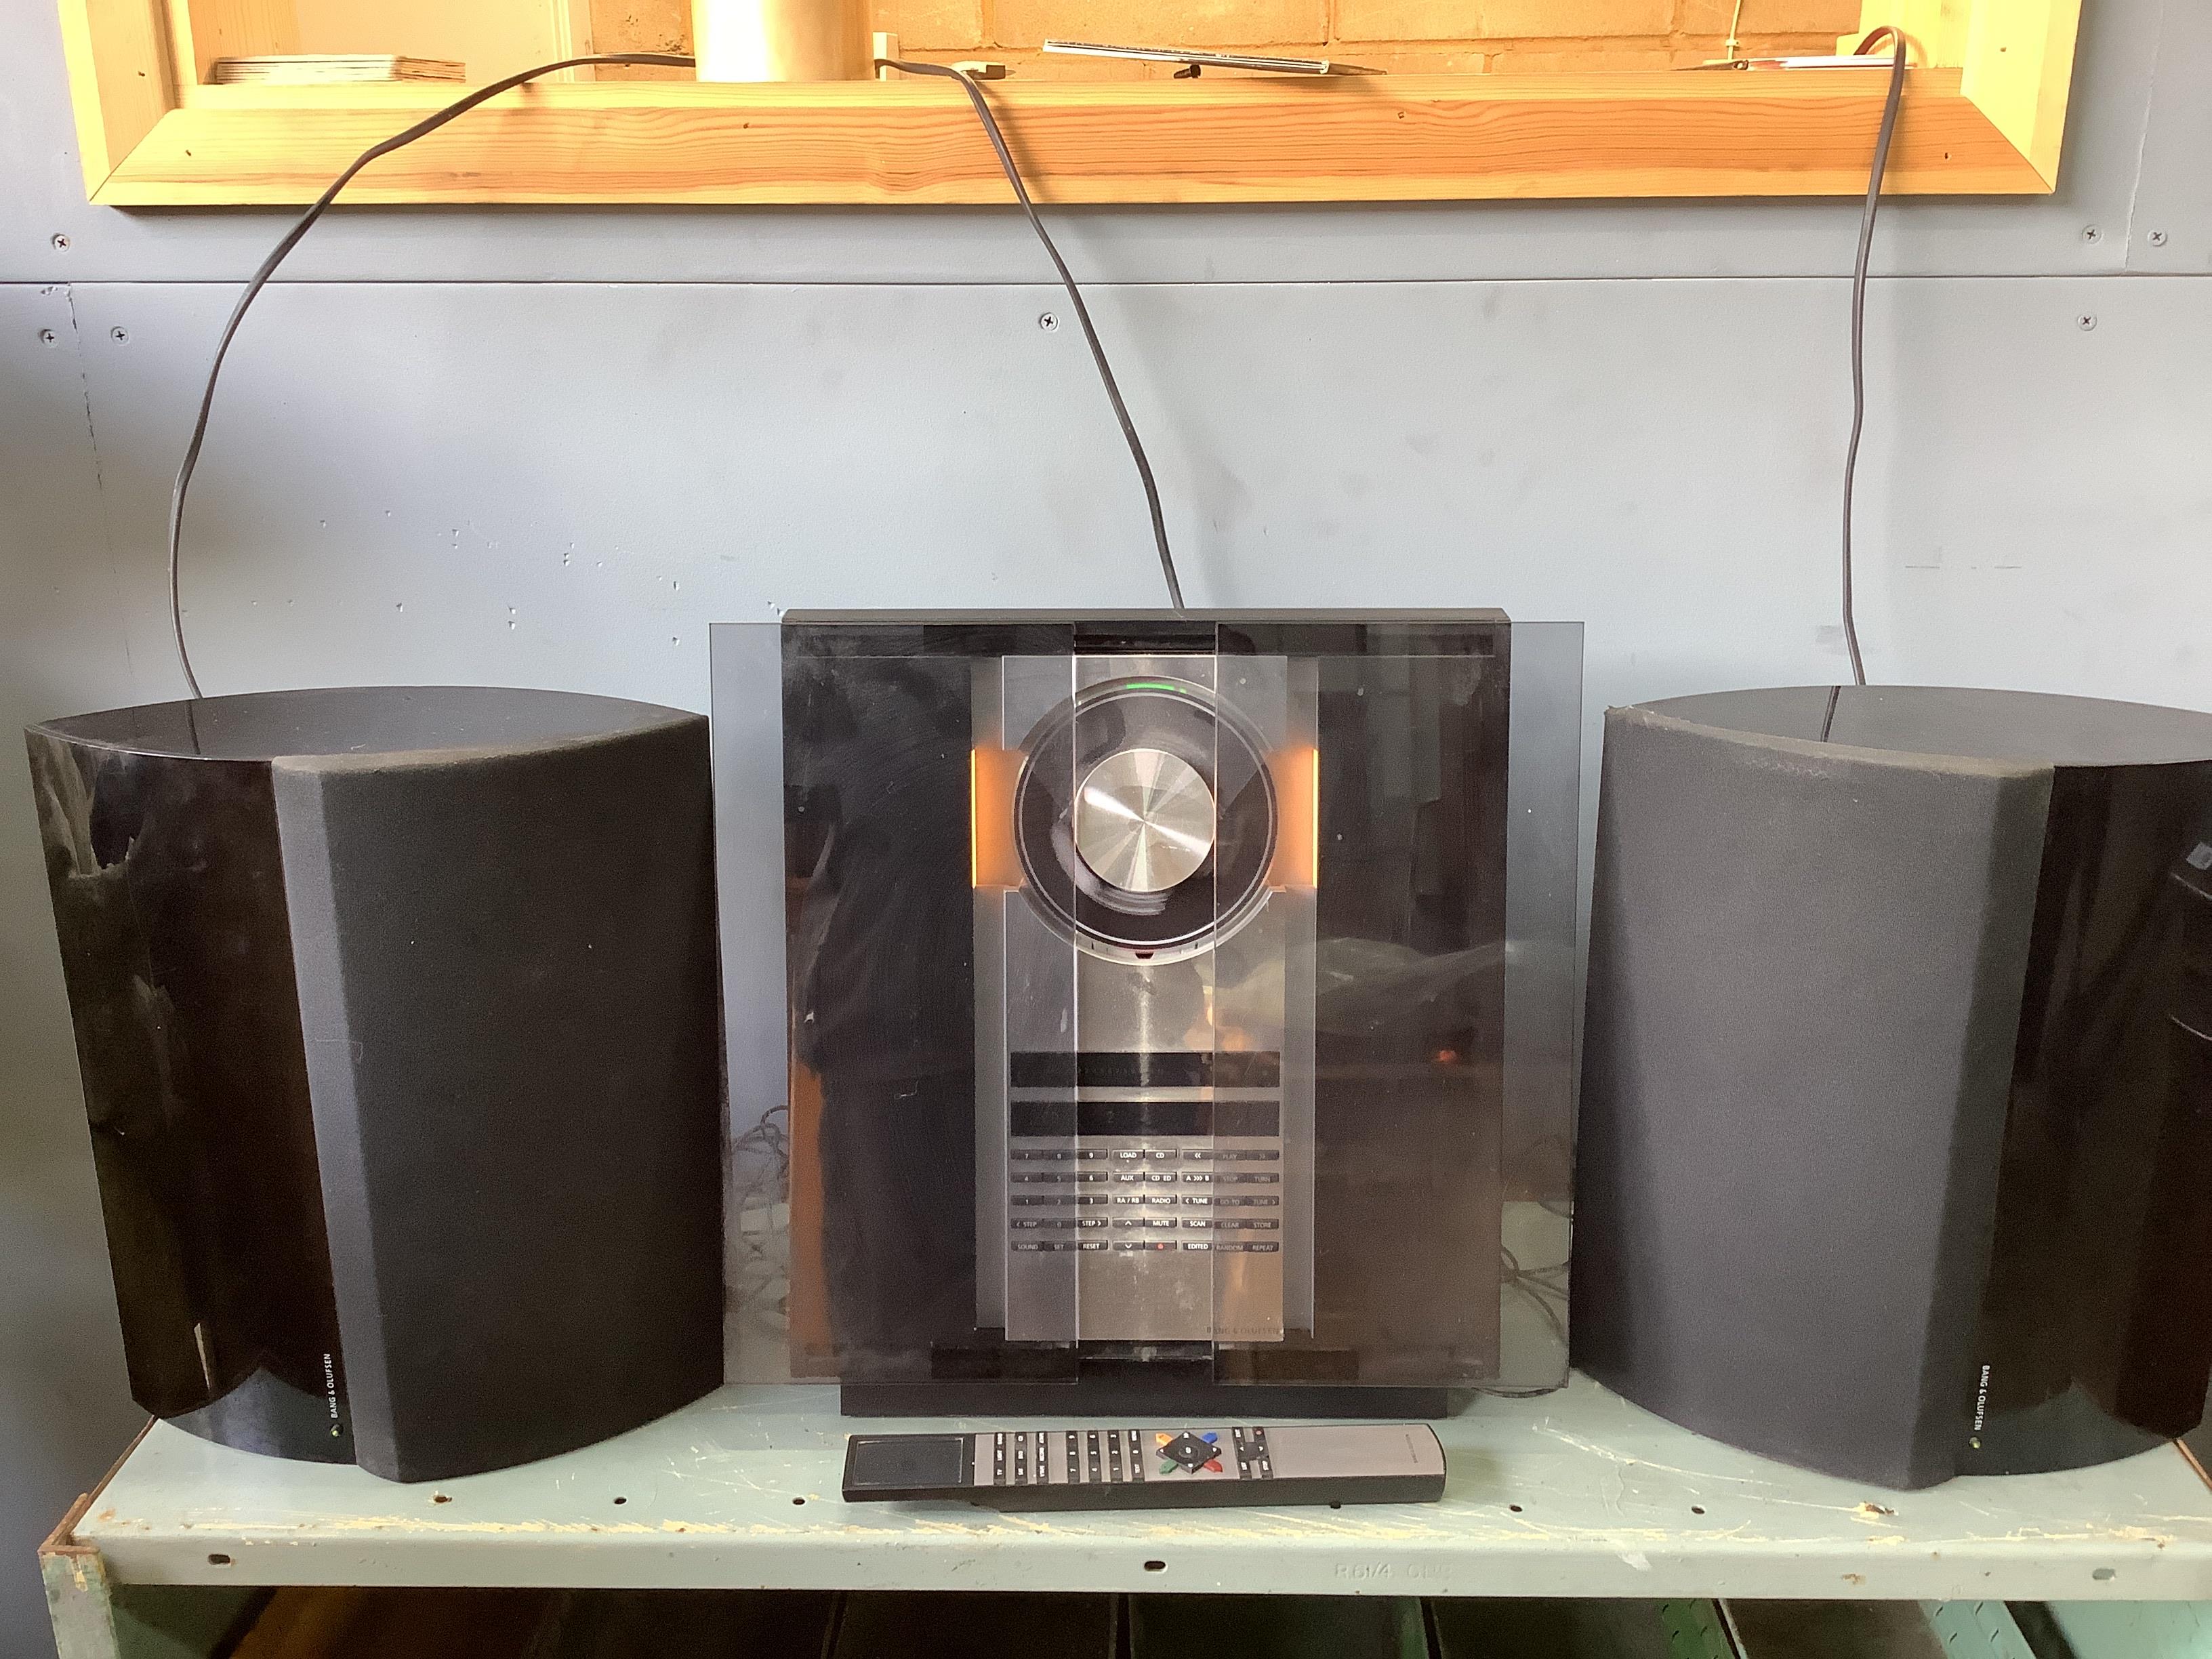 A Bang and Olufsen Beocenter 2300 with a pair of Bang and Olufsen Beolab 4000 speakers